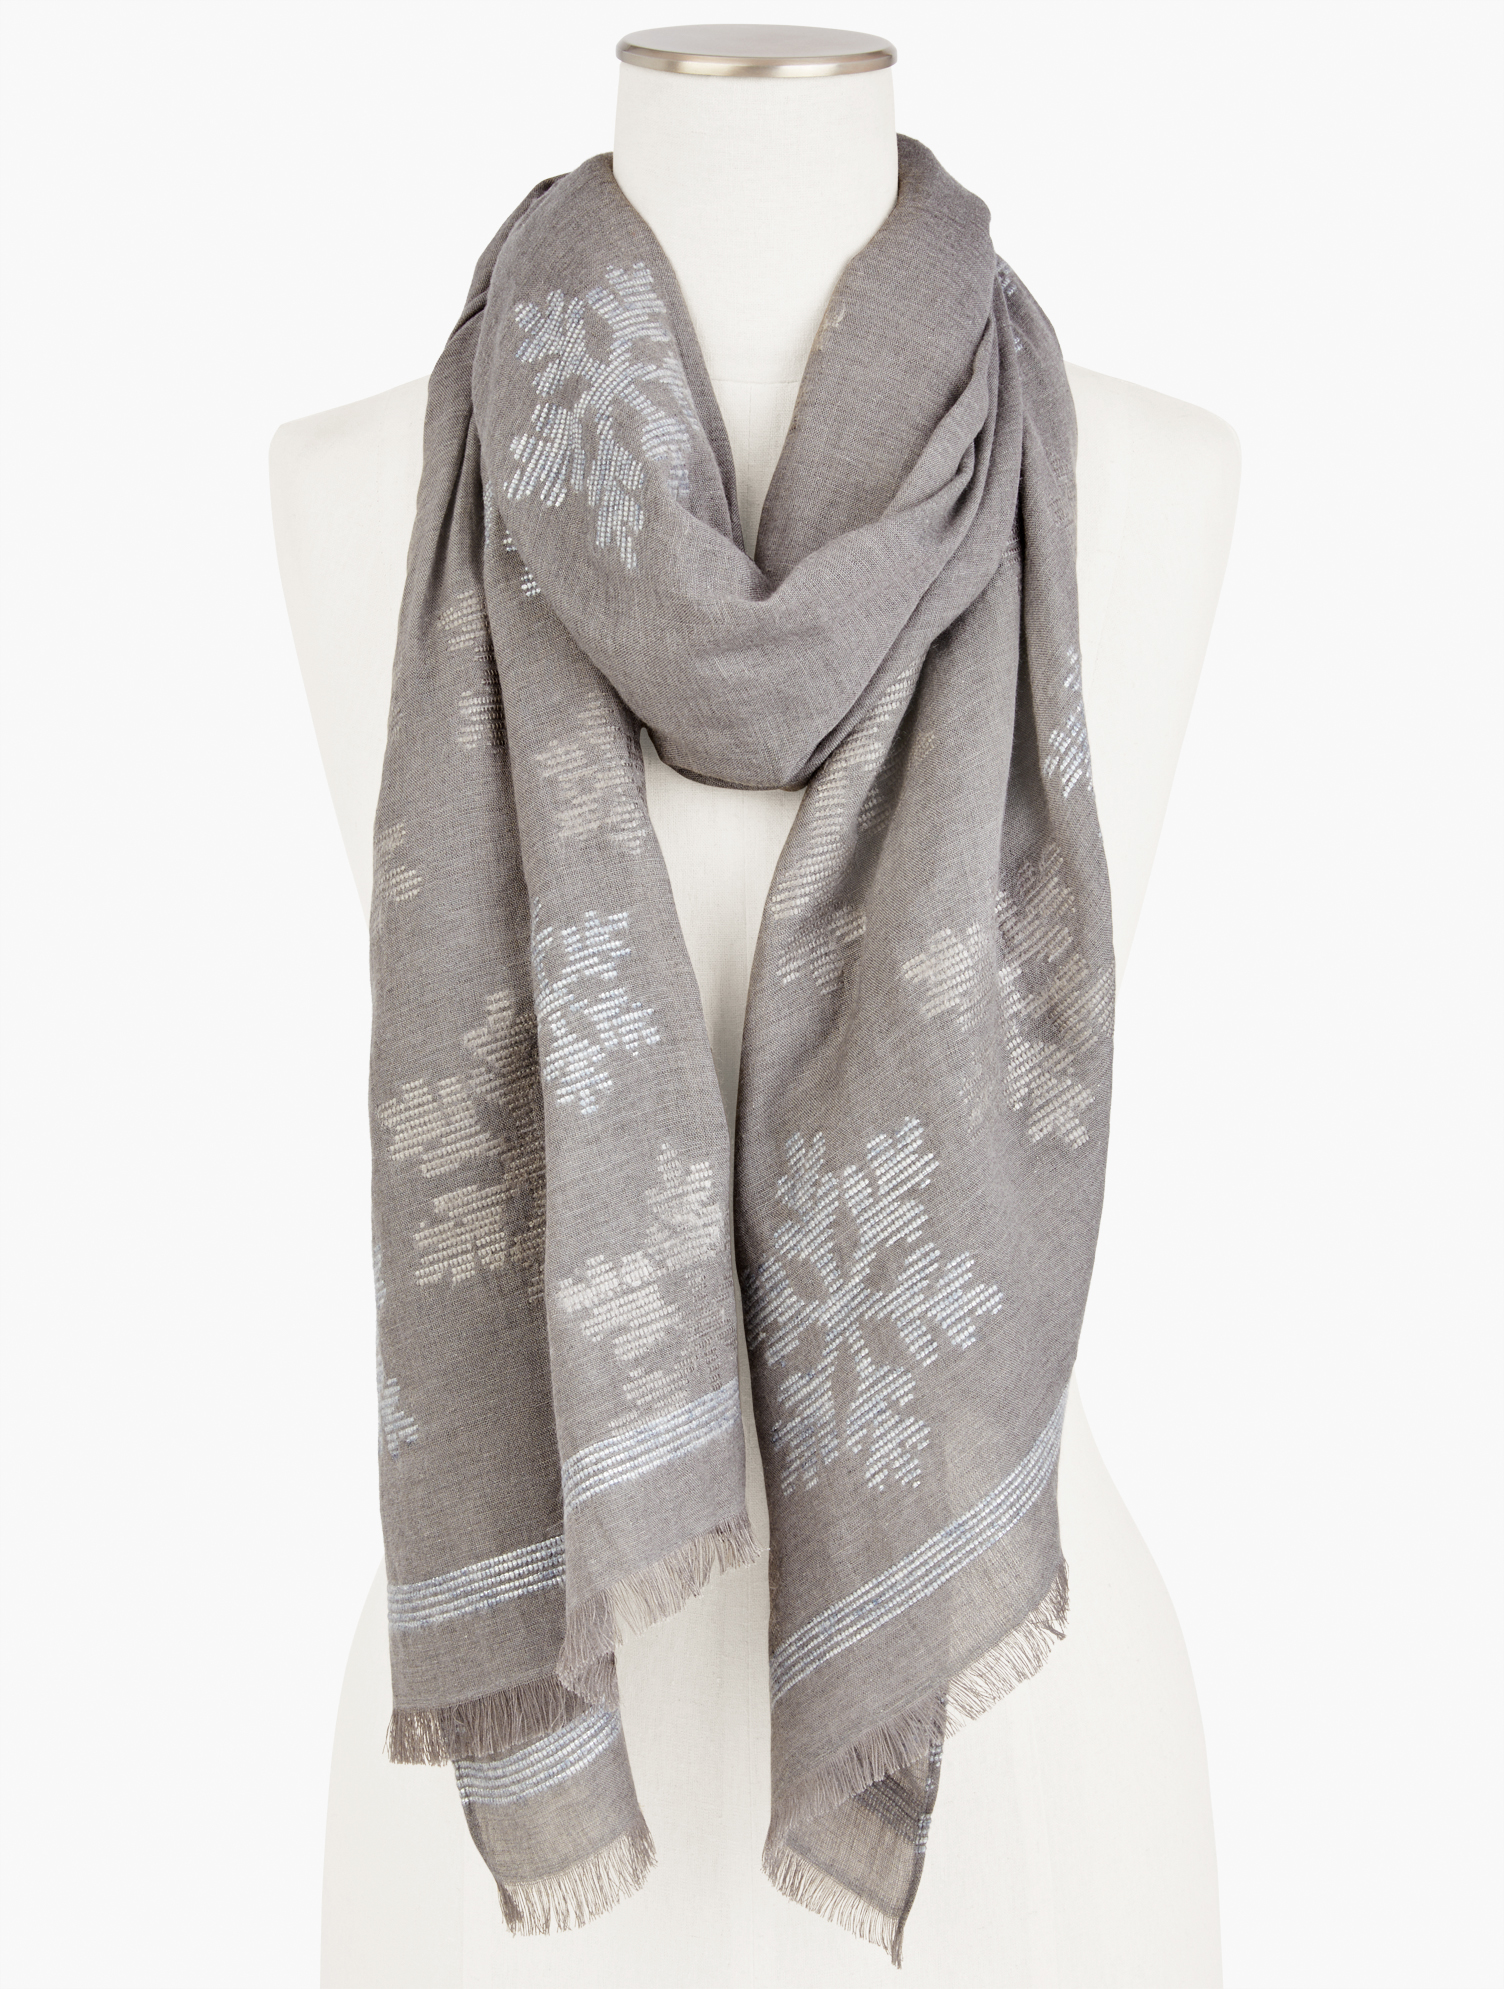 Talbots Clipped Jacquard Snowflake Oblong Scarf - Grey Sky Heather - 001